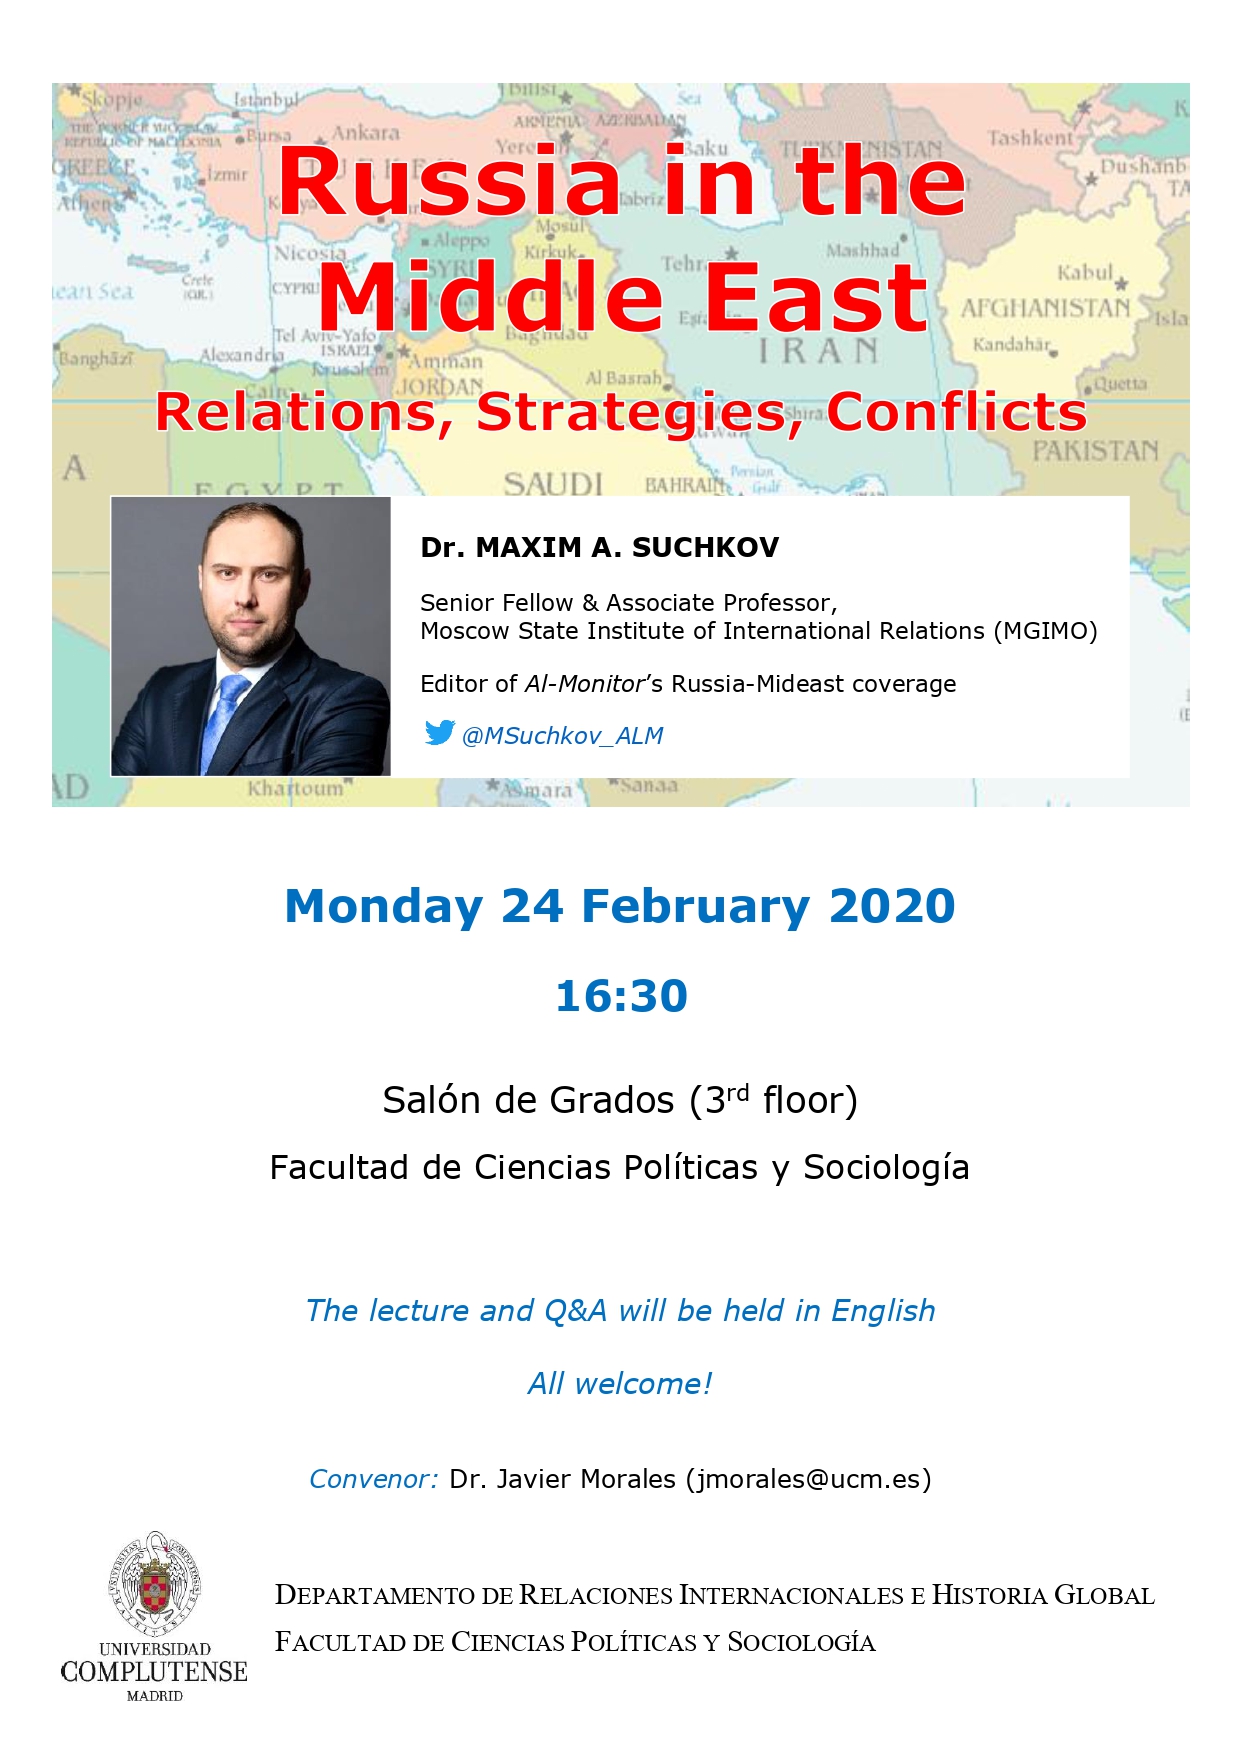 «Russia in the Middle East. Relations, Strategies, Conclicts.» Conferencia de Dr. Maxim A. Suchkov. Senior Fellow & Associate Professor, Moscow State Institute of International Relations (MGIMO)